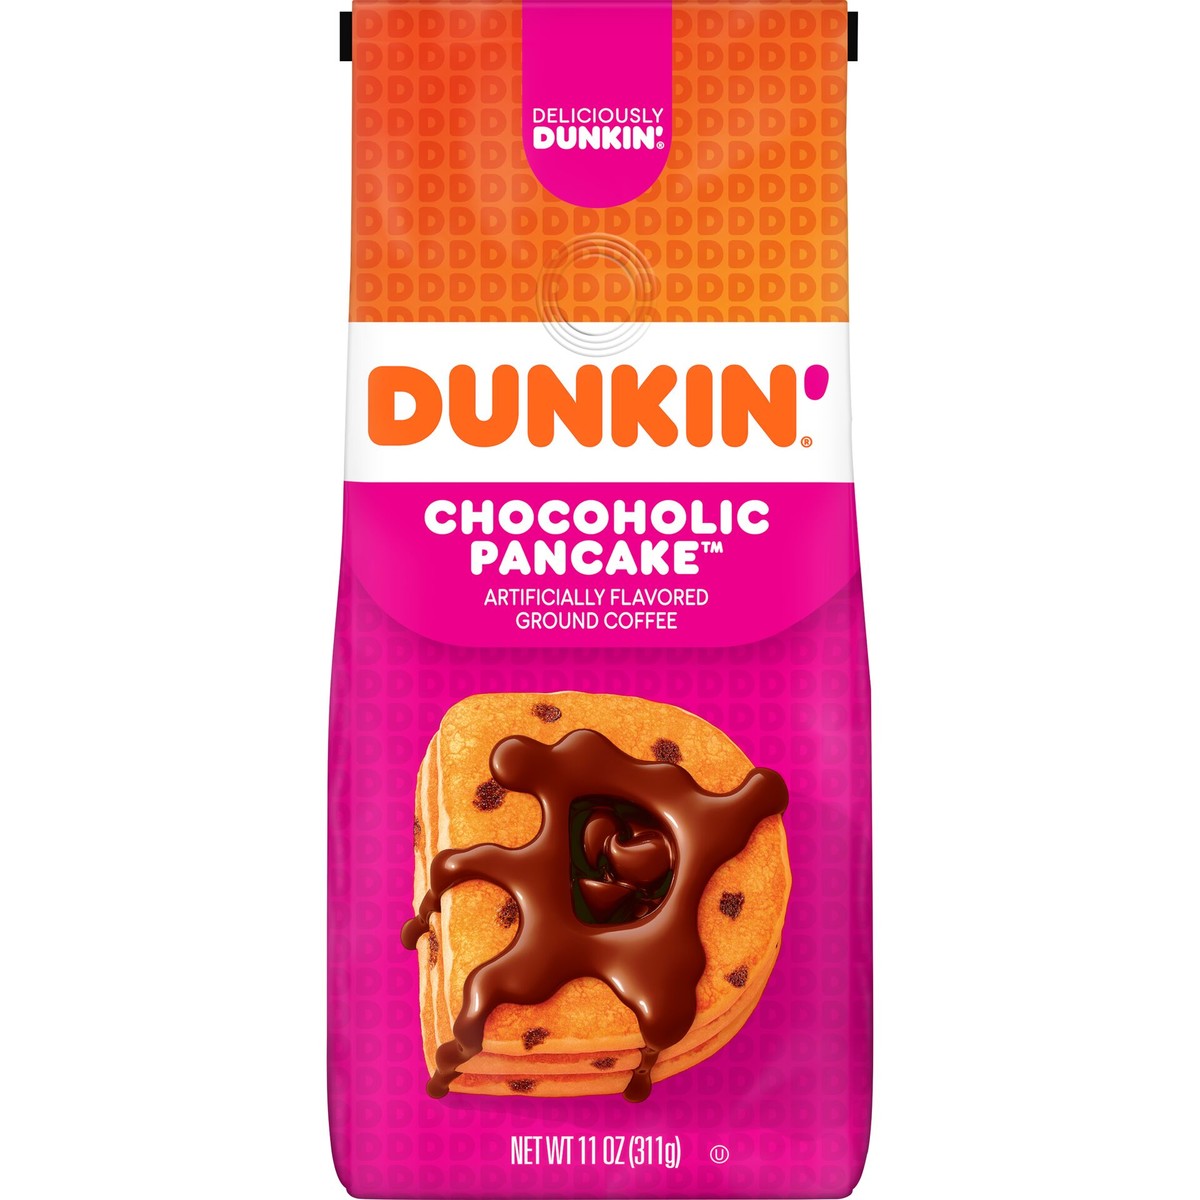 Dunkin'® Chocoholic Pancake® Artificially Flavored ground coffee in a pink and orange bag with an image of a stack of chocolate chip pancakes in the shape of the letter "D" drizzled in chocolate syrup on it